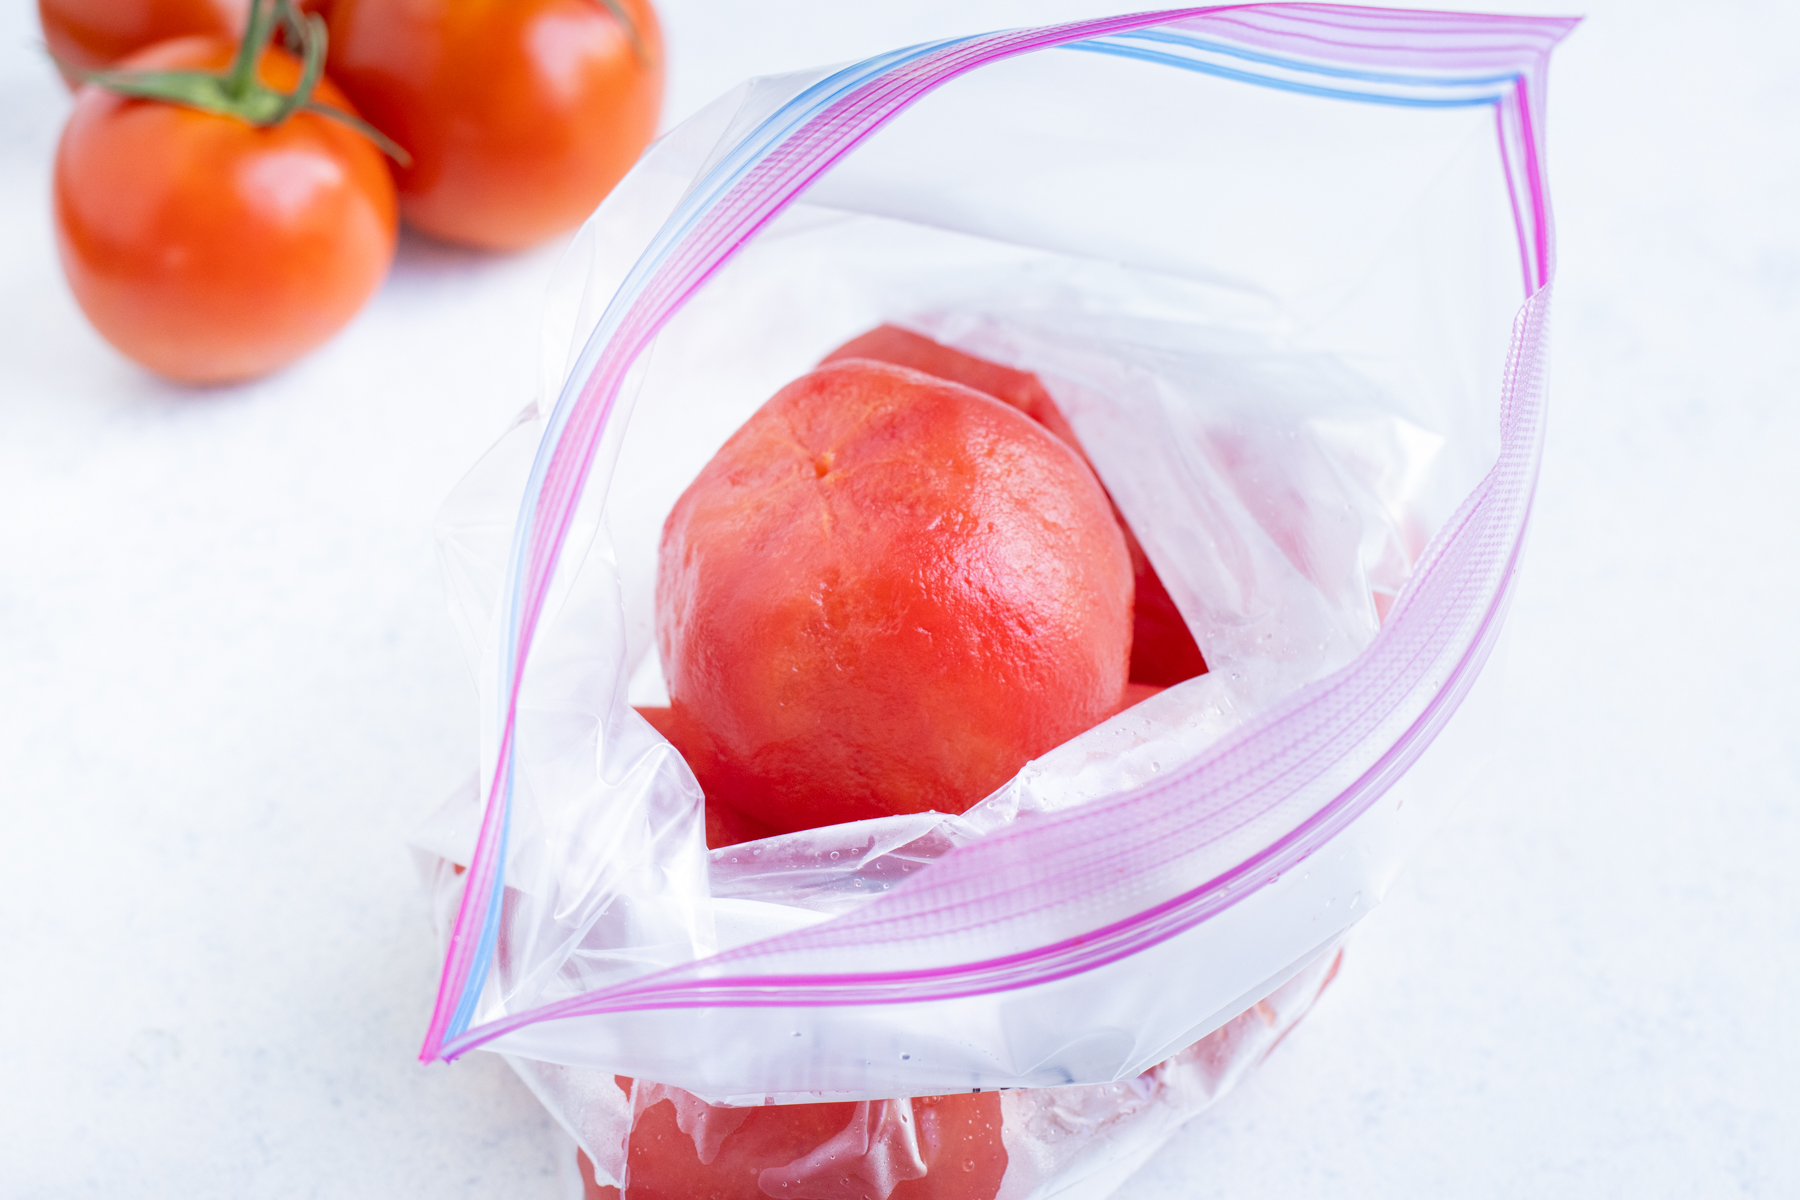 Bright, red tomatoes easily freeze for future use.